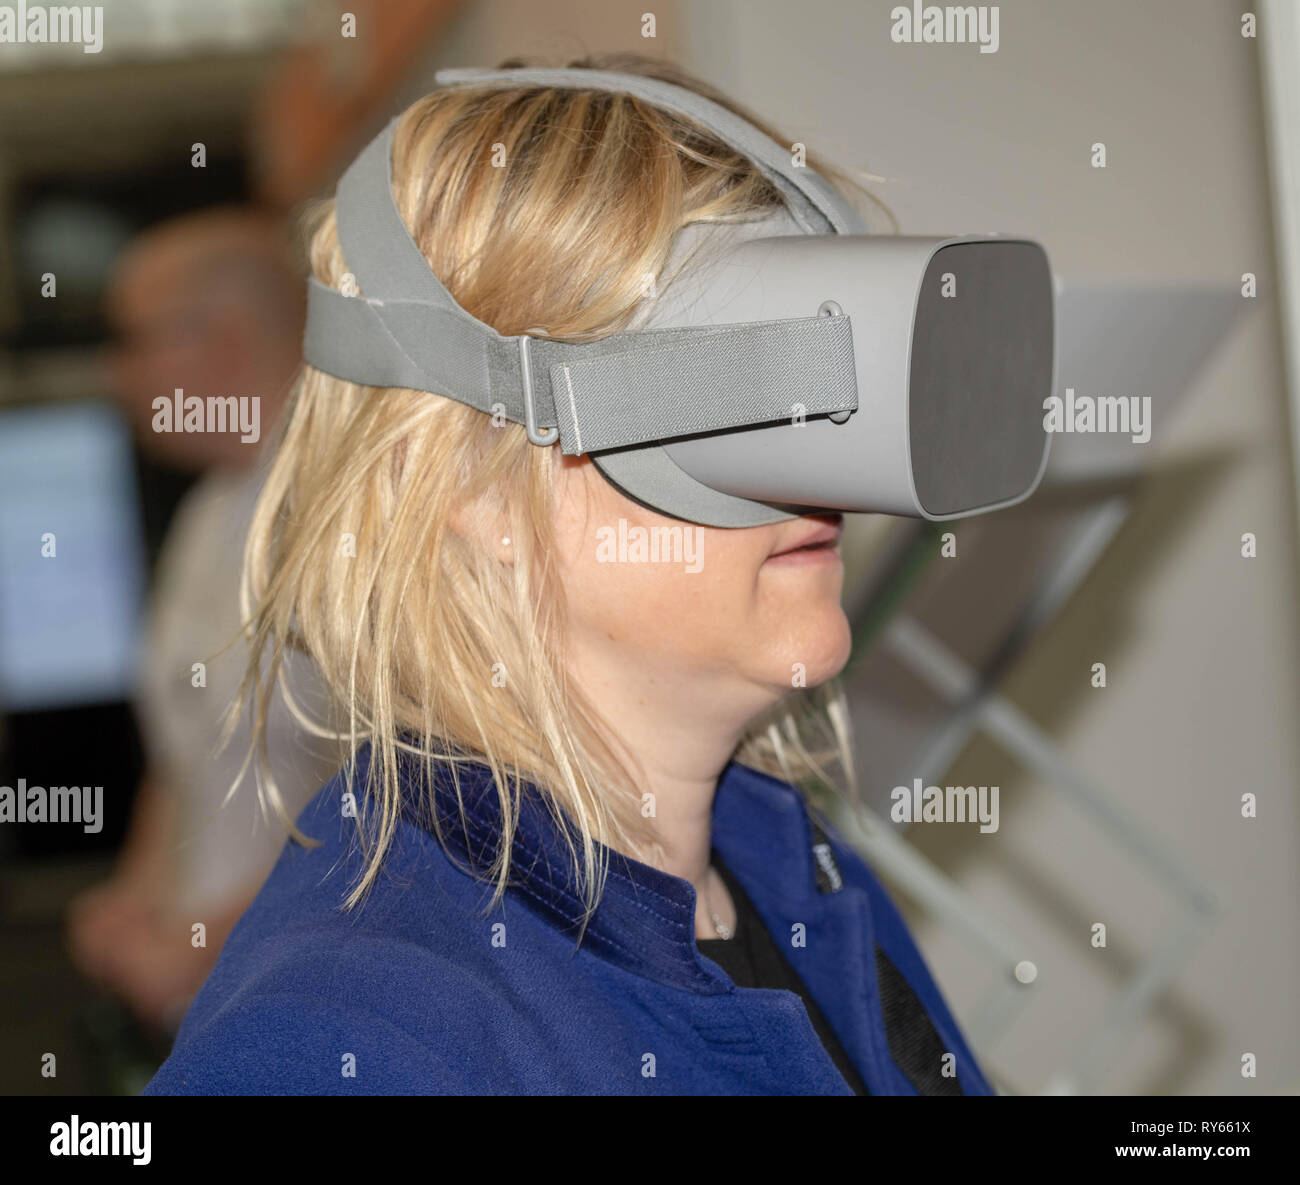 London, UK. 12th March 2019. VR headset from Mbryanic at The Wearable Technology Show at the Business Design Centre, The largest dedicated event for connected technology, the show features innovative products from start-ups as well as products from major technology companies and includes the latest in virtual reality and augmented reality devices and software Credit: Ian Davidson/Alamy Live News Stock Photo